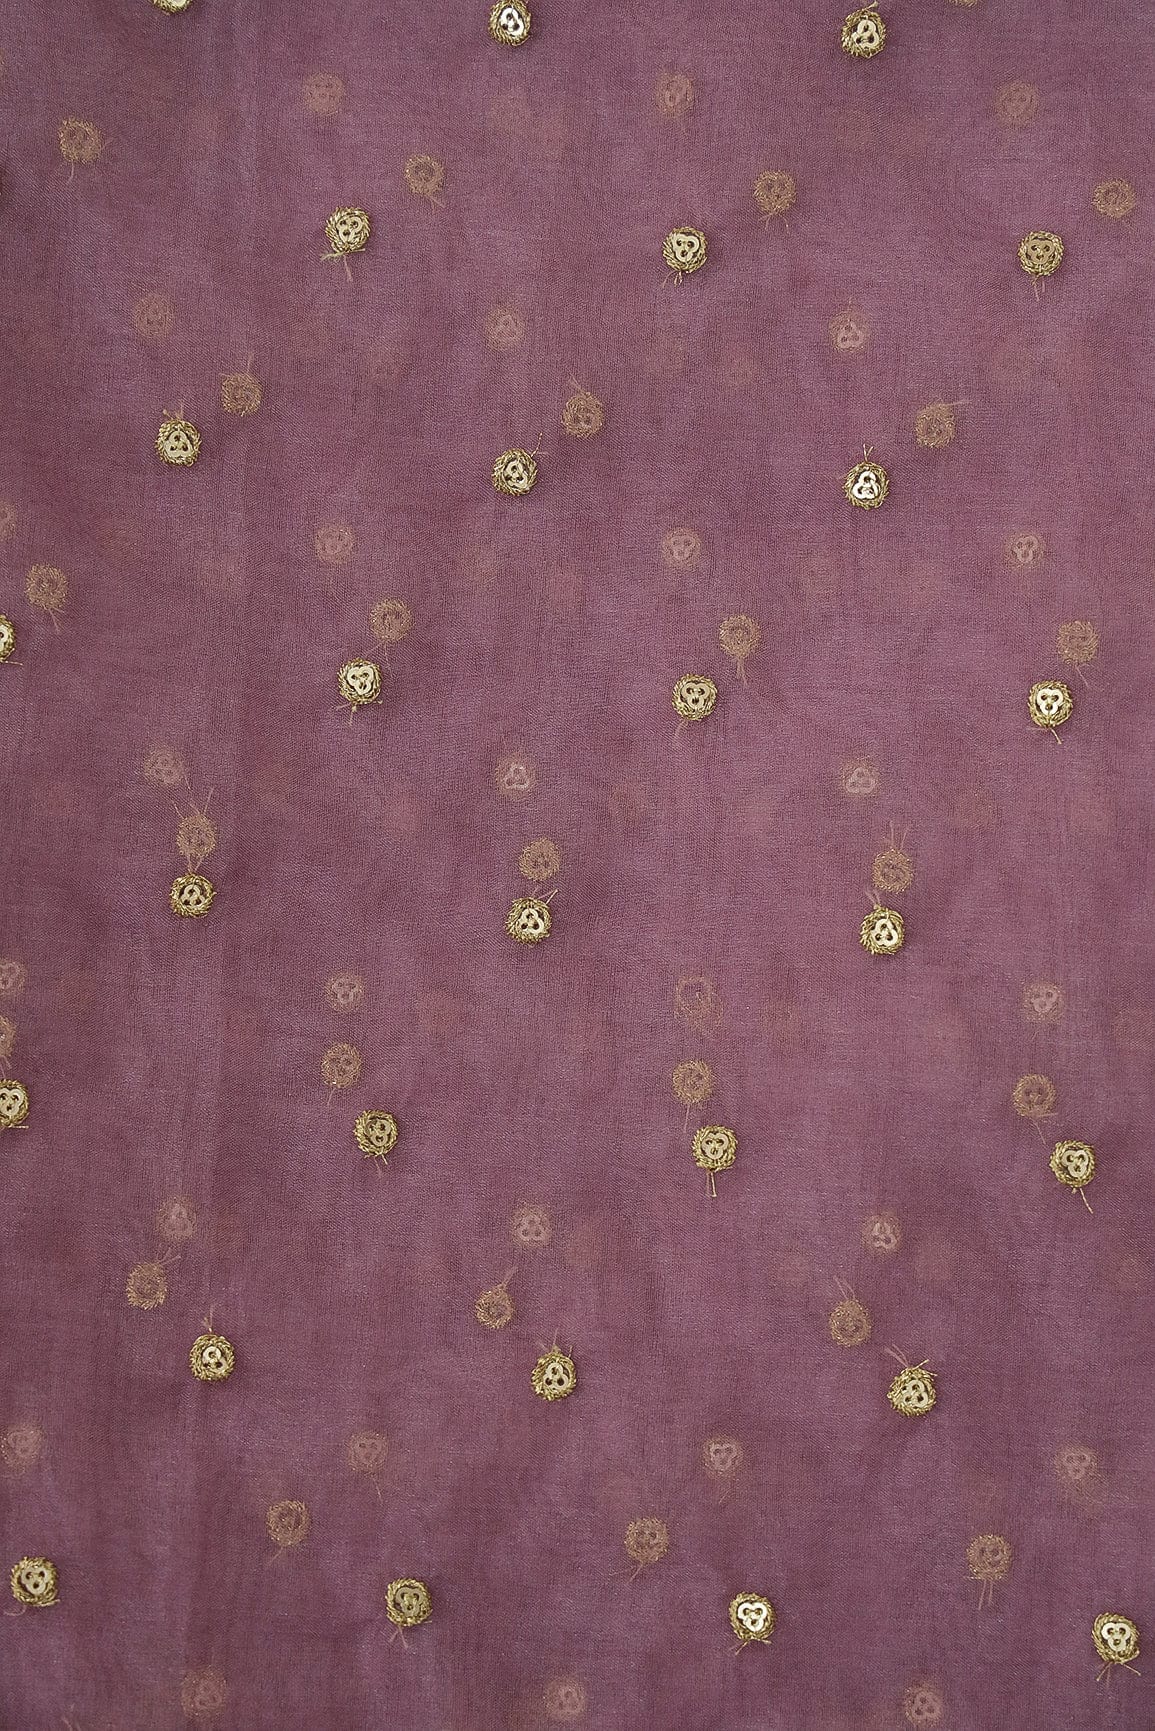 doeraa Embroidery Fabrics Gold Sequins with Gold Thread Motif Embroidery on Purple Organza Fabric